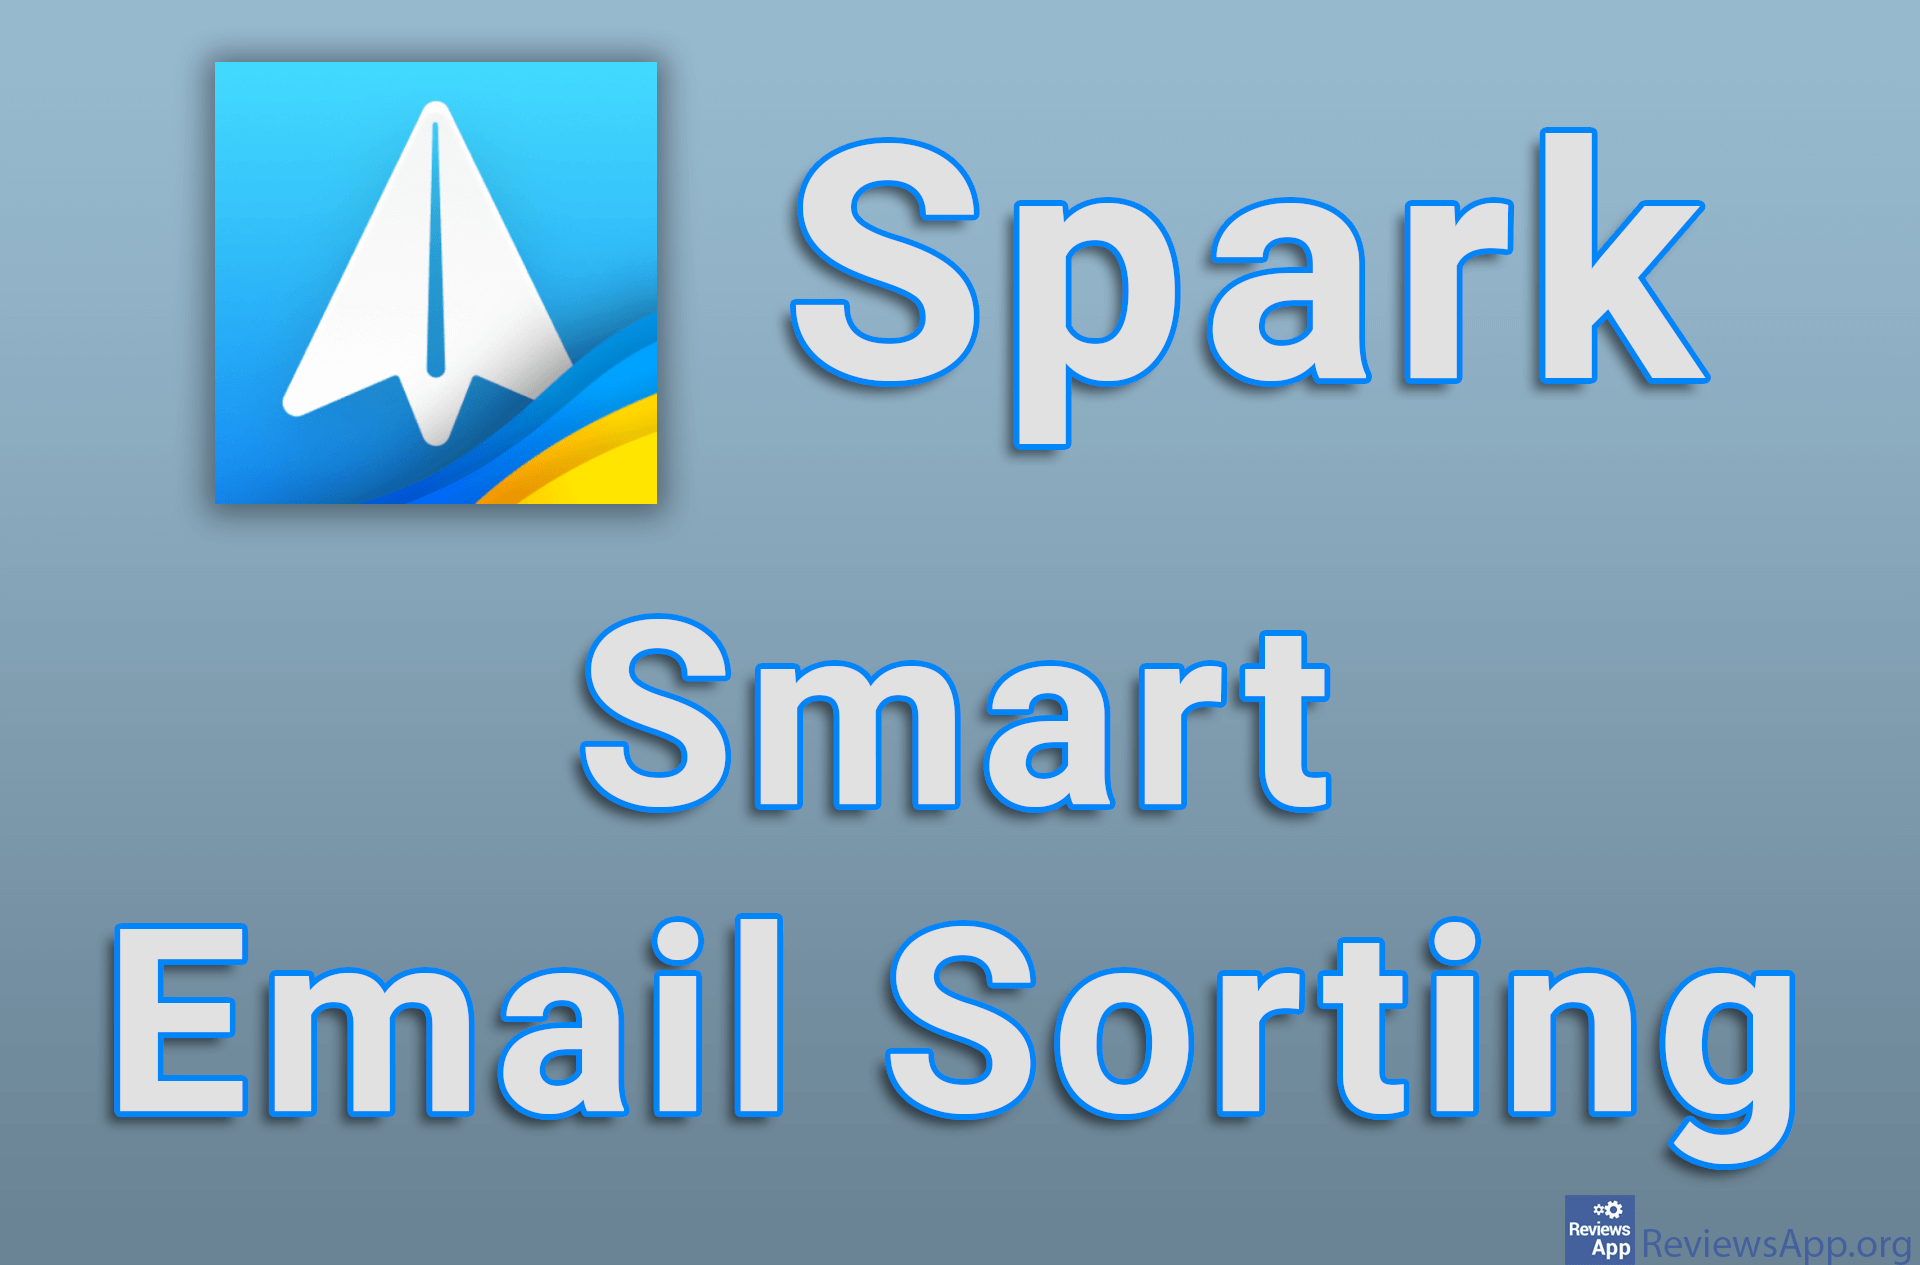 Spark – Smart Email Sorting